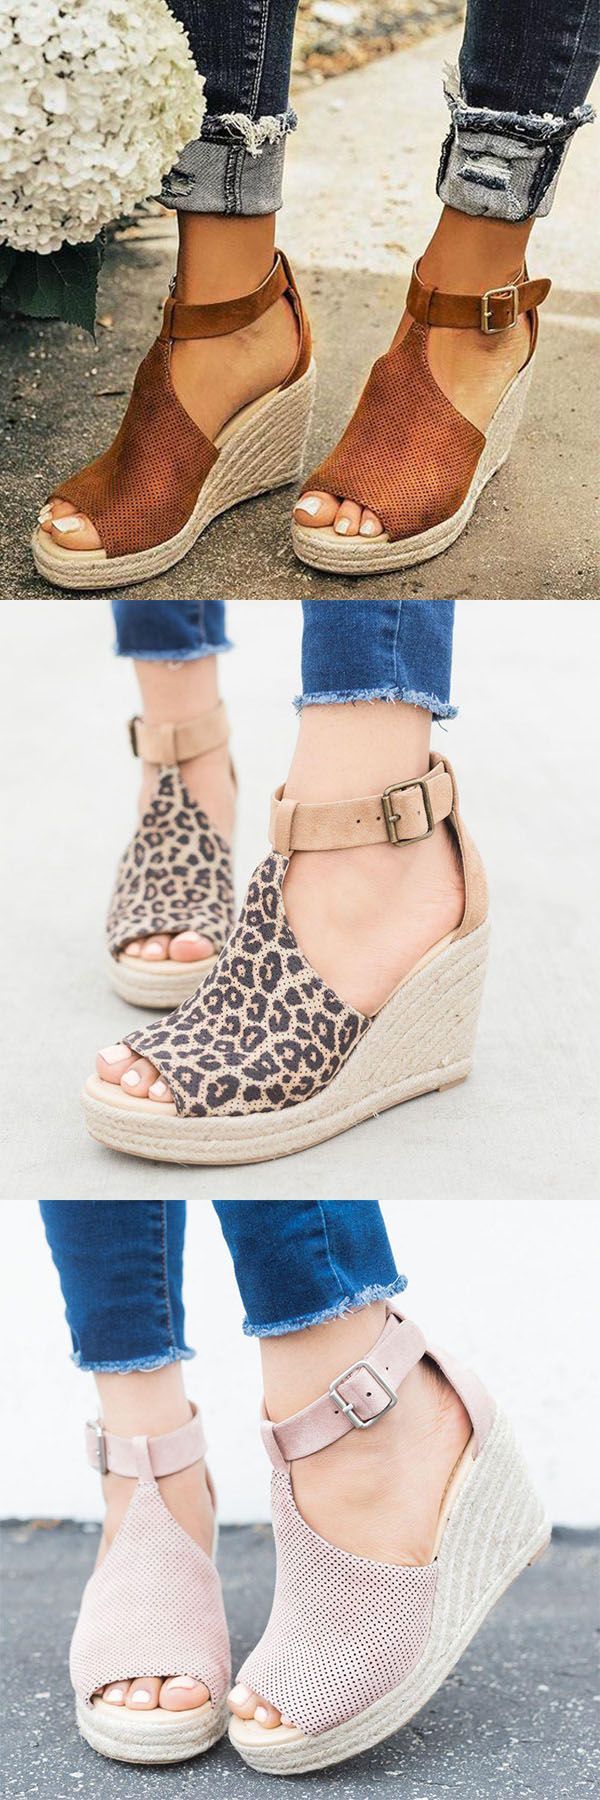 Hot Sale!Women Chic Espadrille Wedges Adjustable Buckle Sandals -   25 mexican style clothes
 ideas